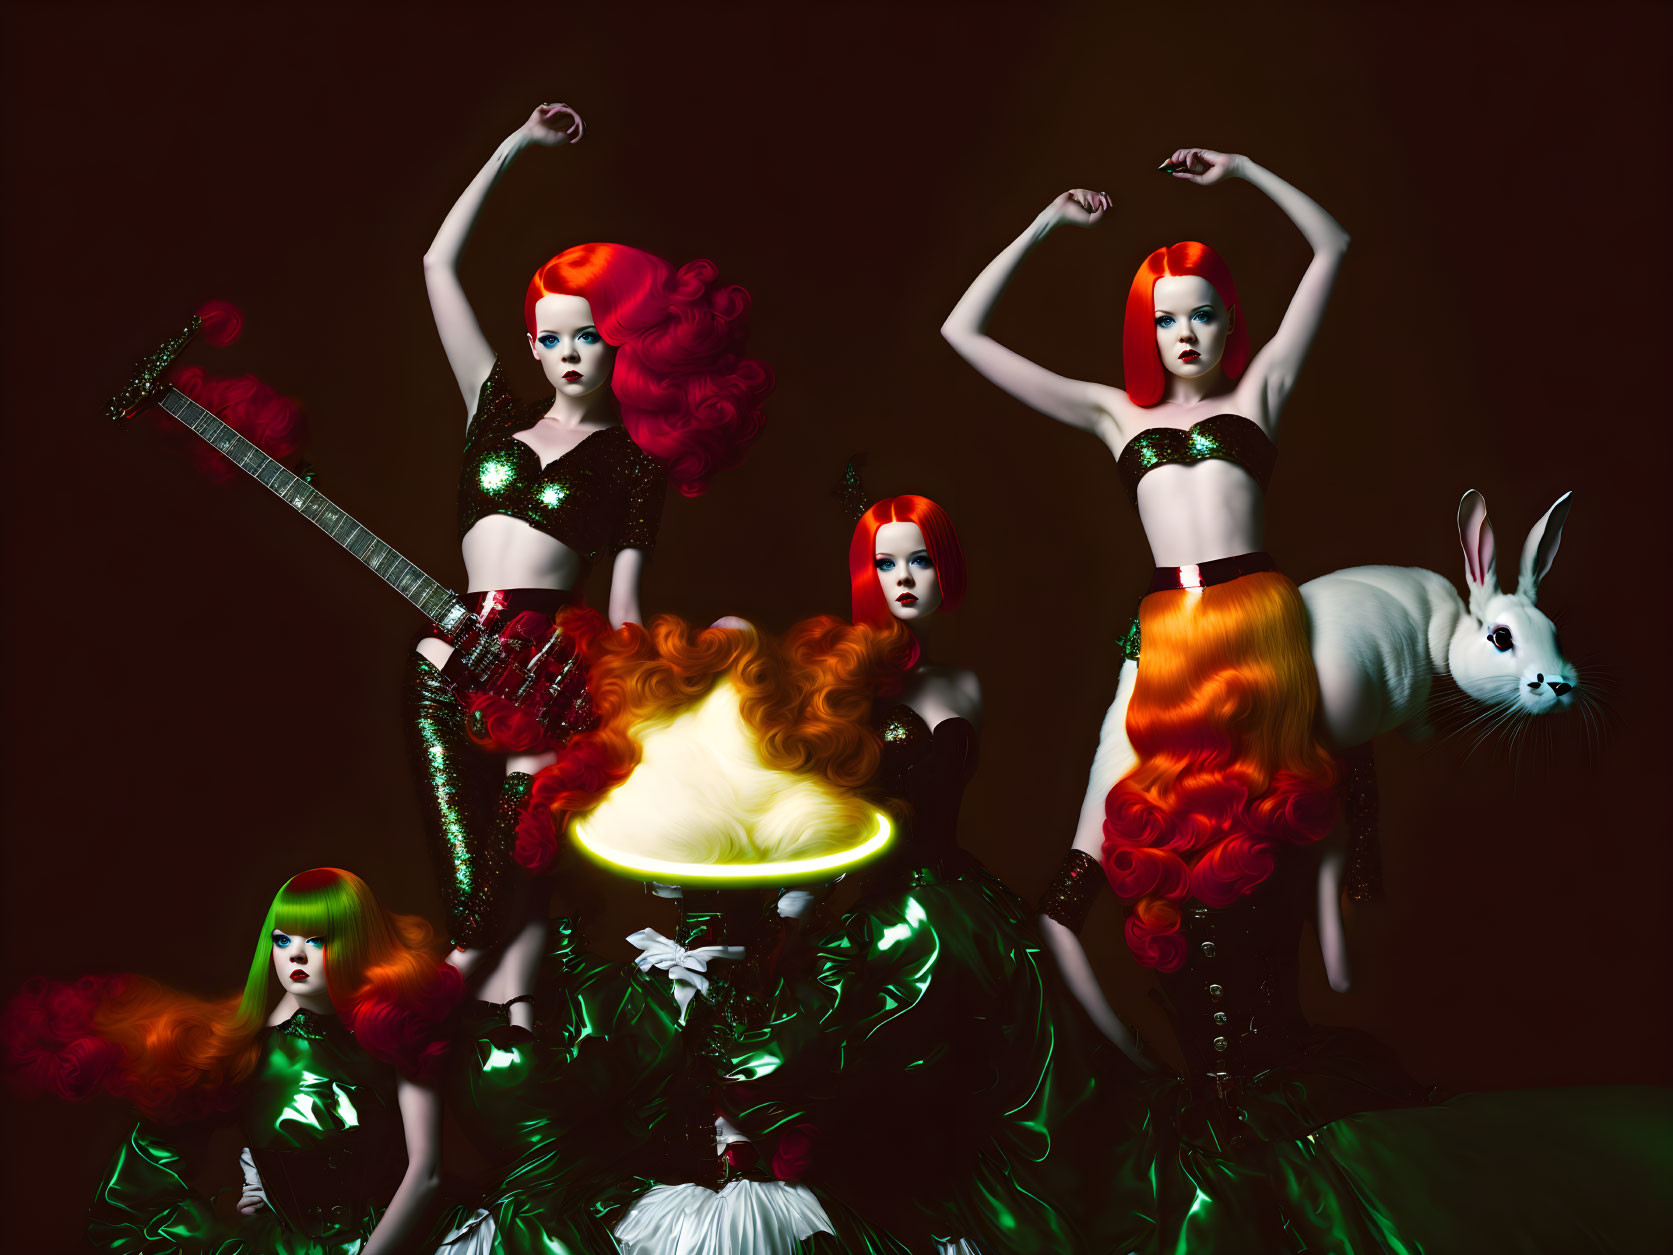 Four Stylized Female Figures with Red Hair and Rabbit in Moody Setting